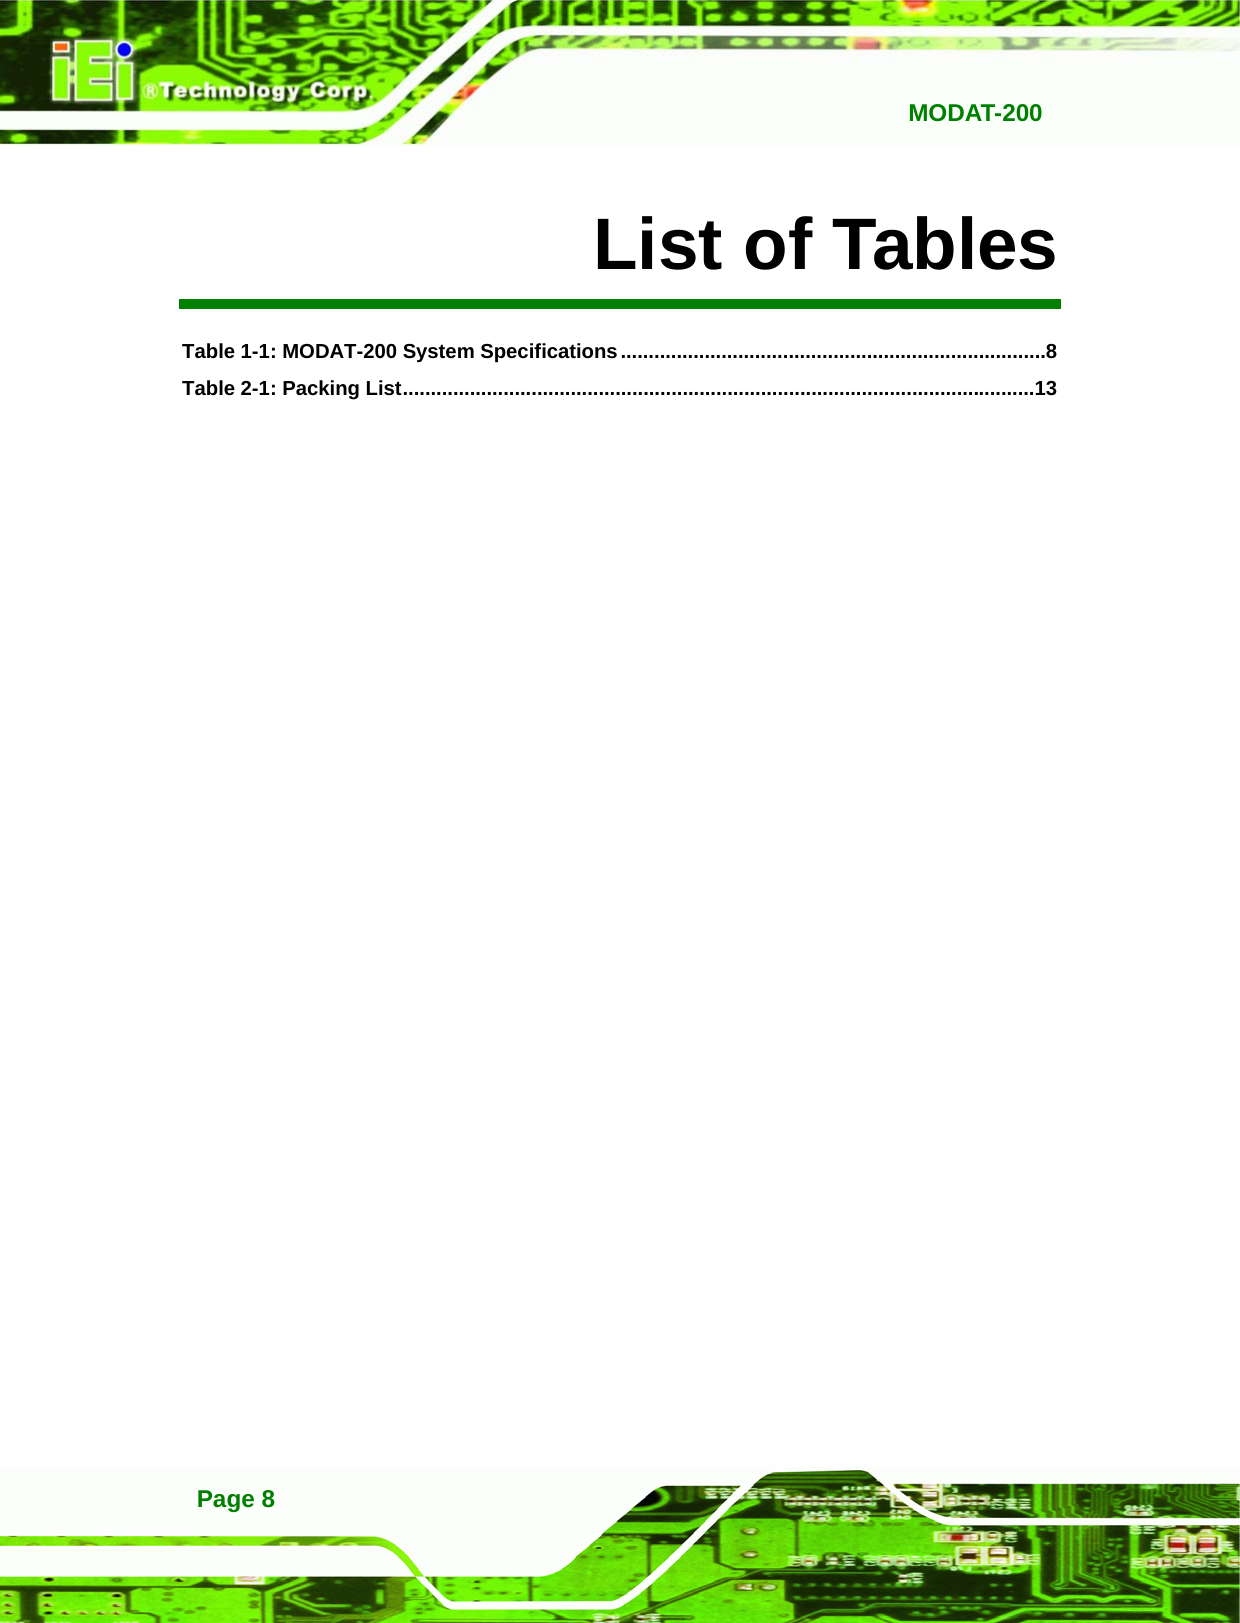   MODAT-200Page 8 List of Tables Table 1-1: MODAT-200 System Specifications ............................................................................ 8 Table 2-1: Packing List ................................................................................................................. 13  